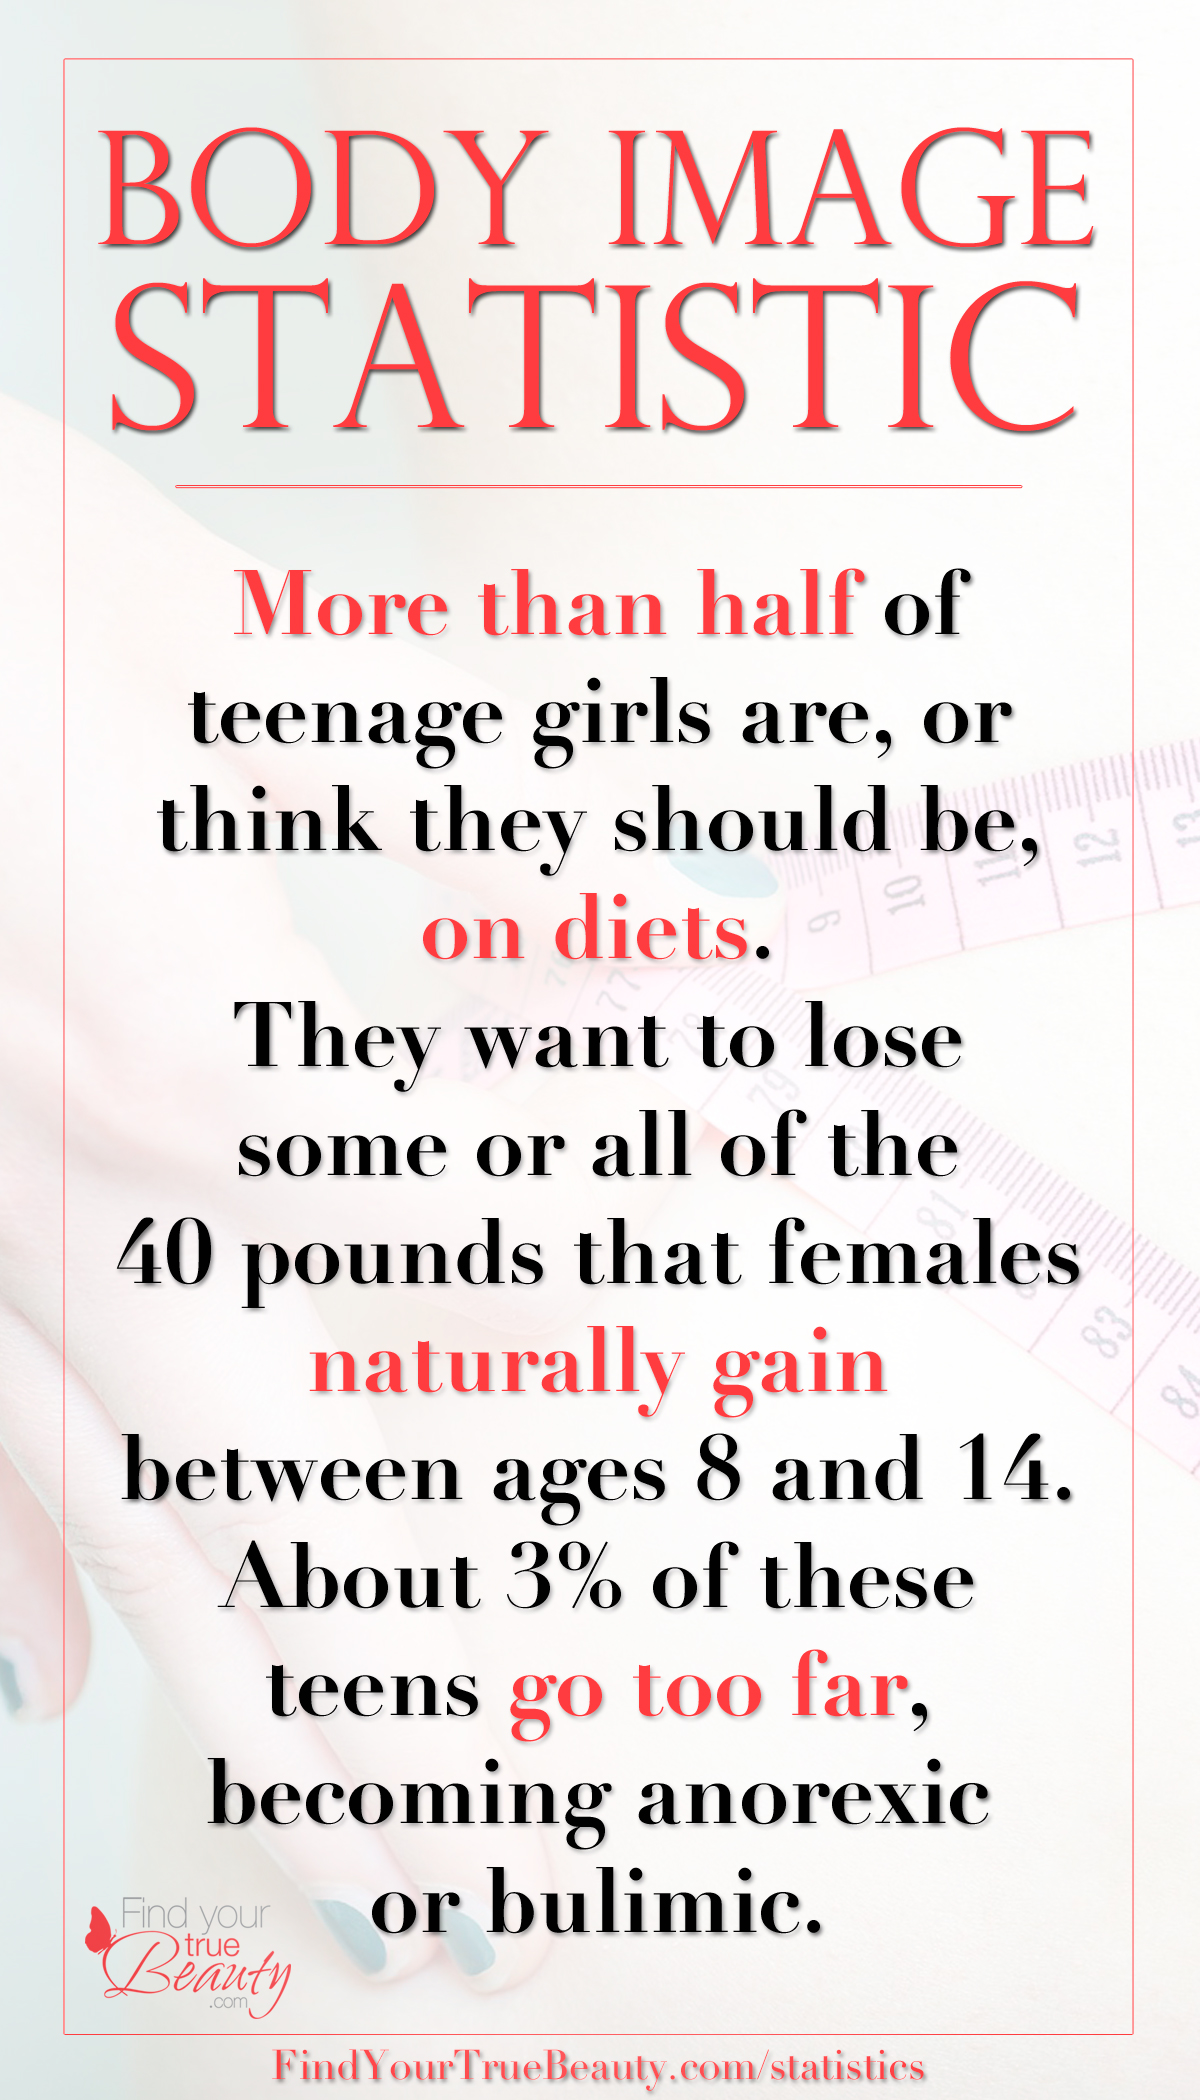 Check out these eye-opening body-image statistics